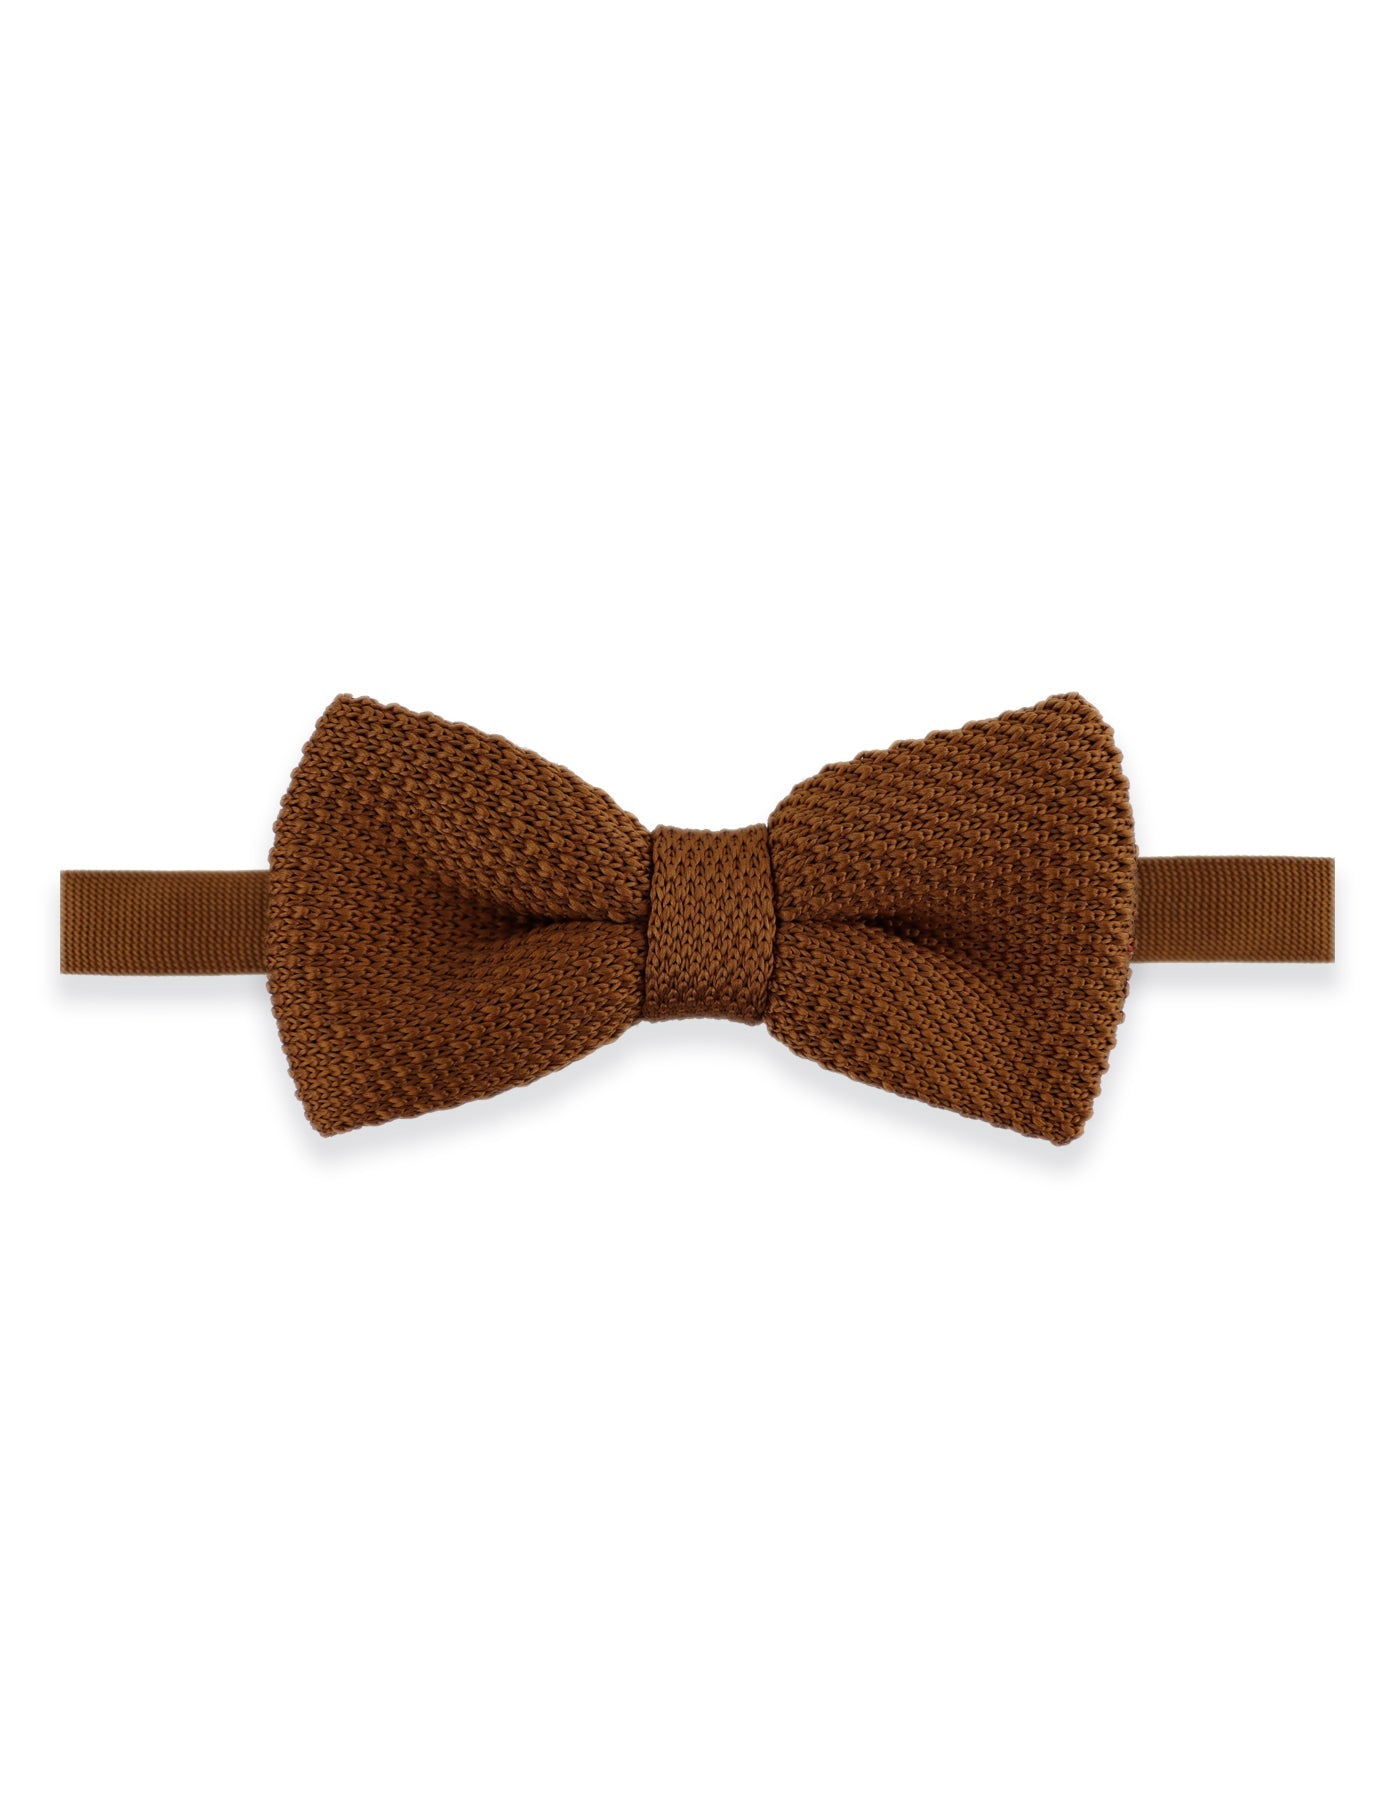 100% Polyester Square End Knitted Tie - Caramel Brown